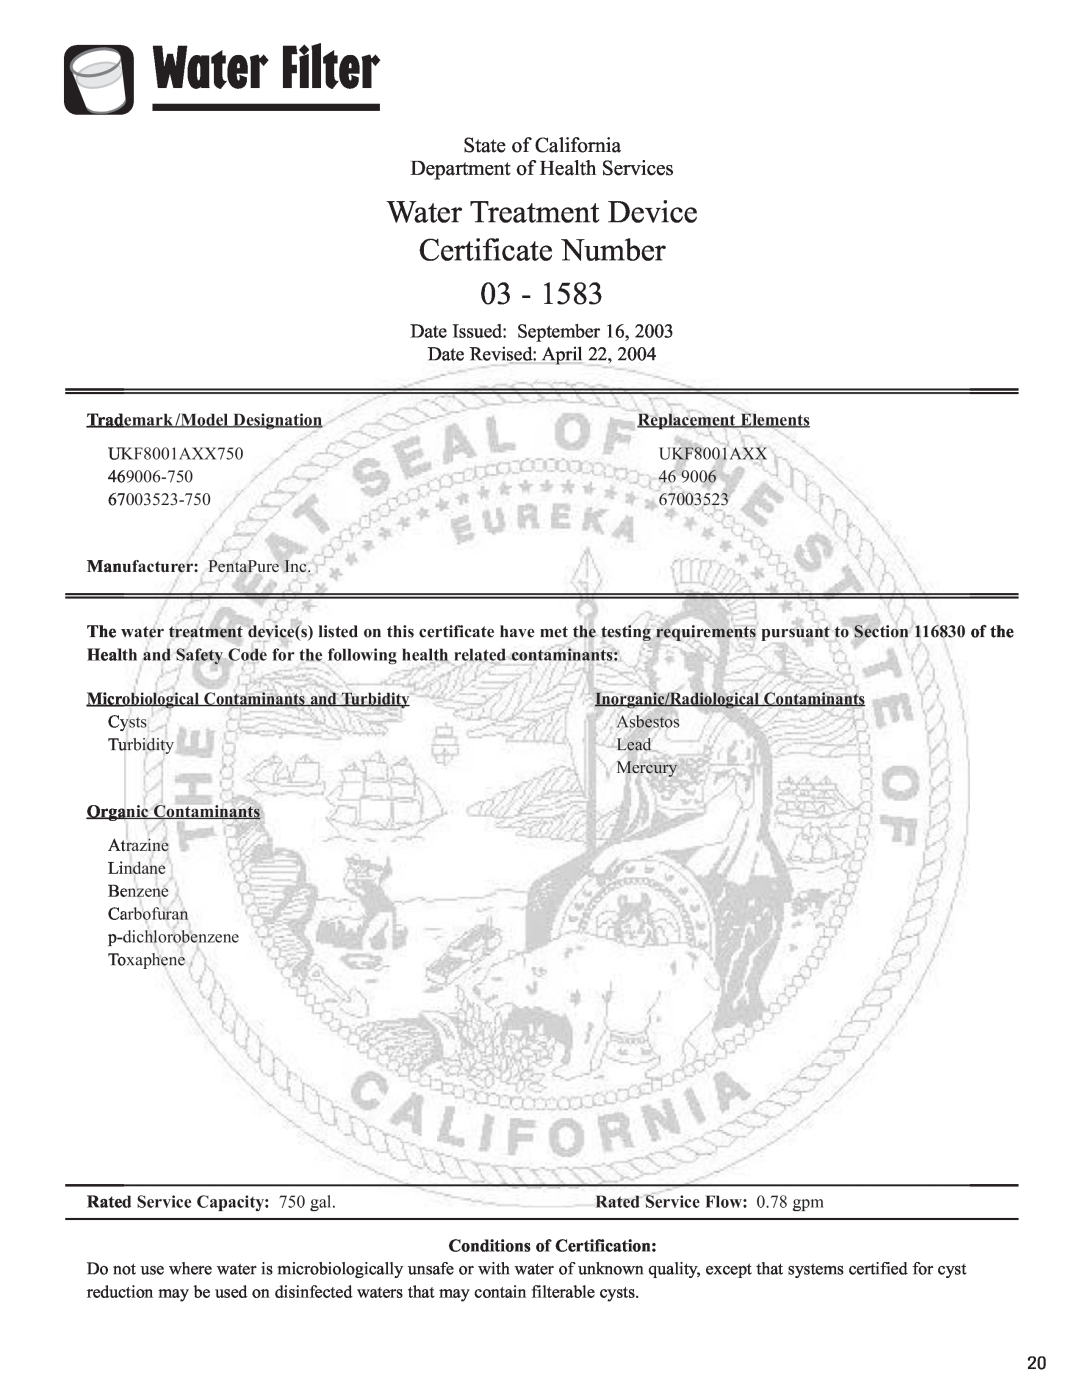 Amana ASD2328HES Certificate Number, State of California Department of Health Services, Date Issued September 16 